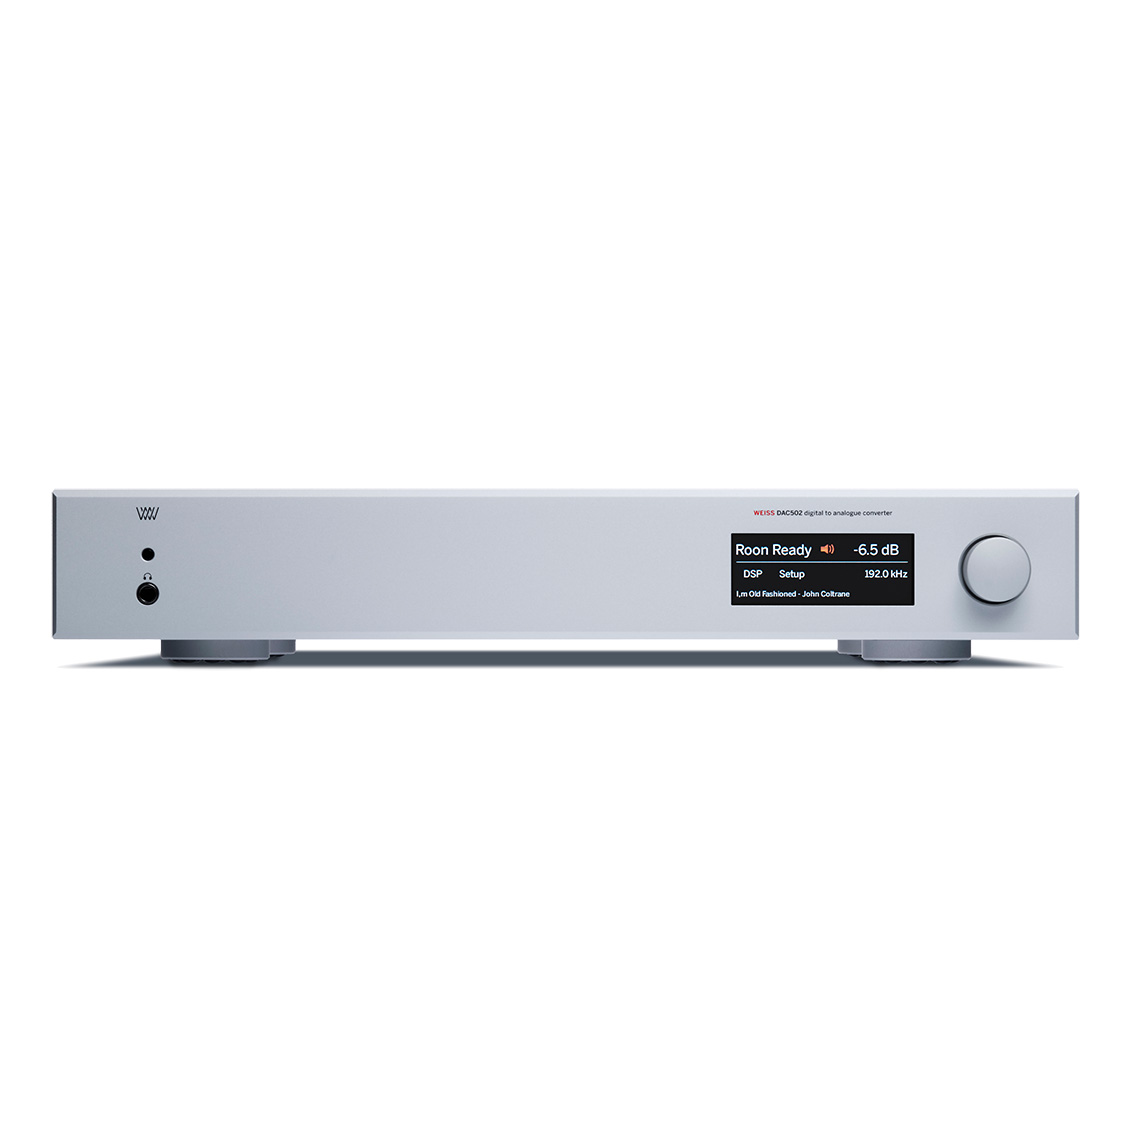 DAC502 FRONT S 1136